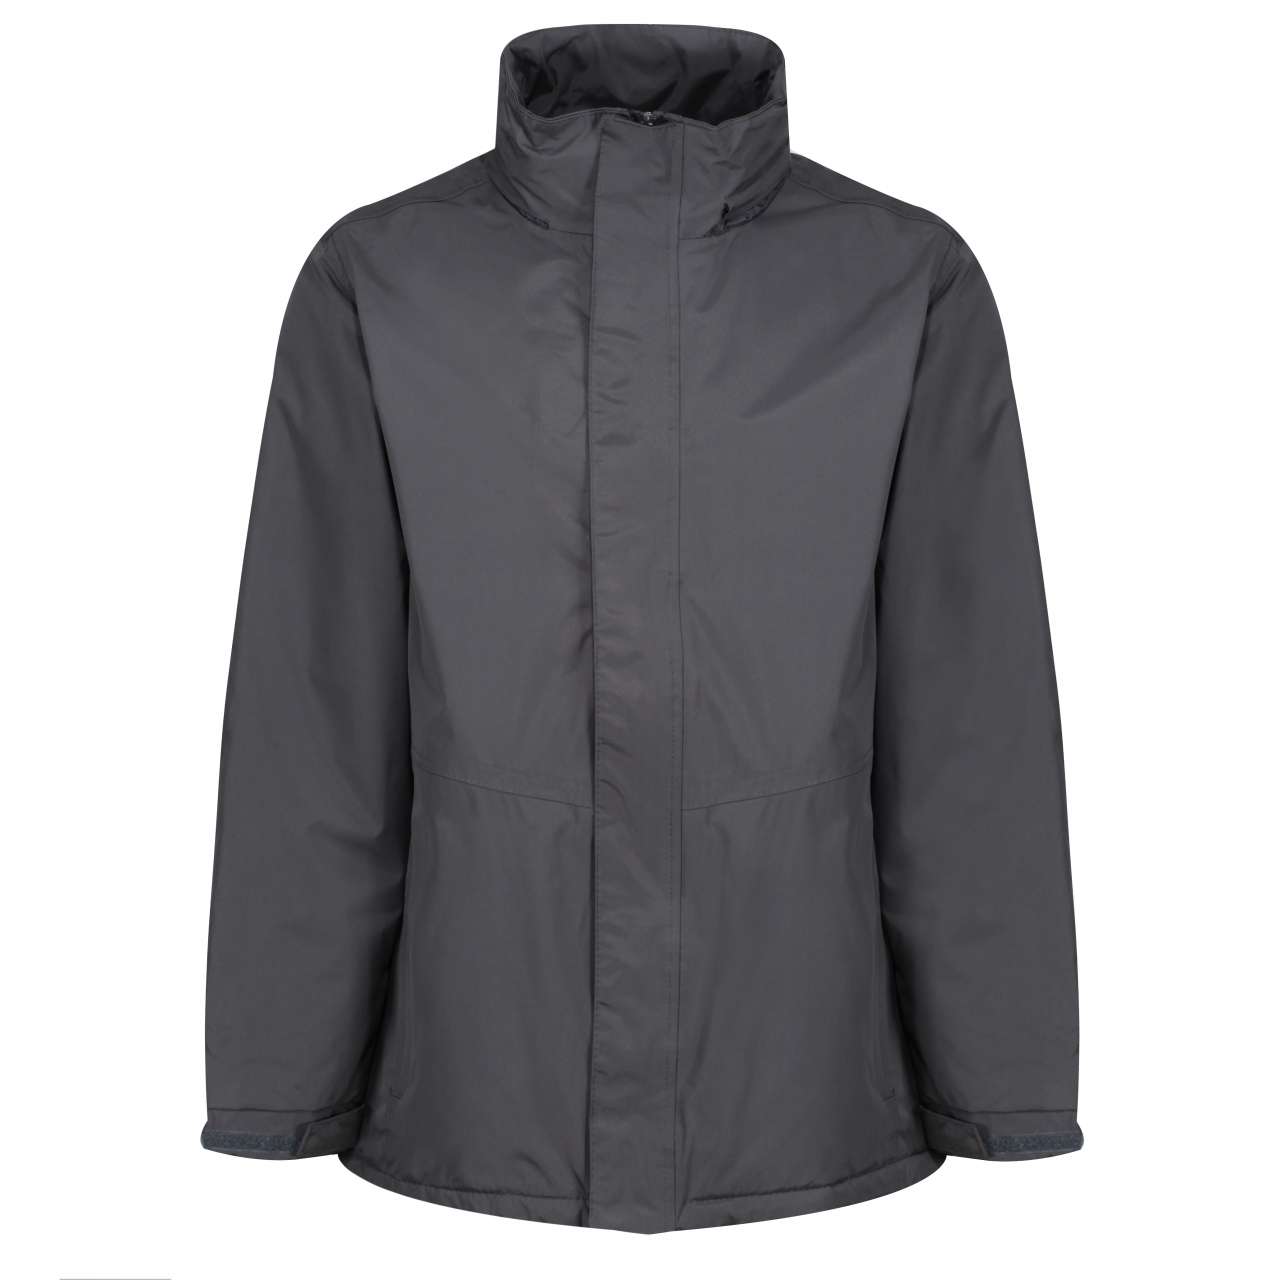 BEAUFORD - INSULATED JACKET